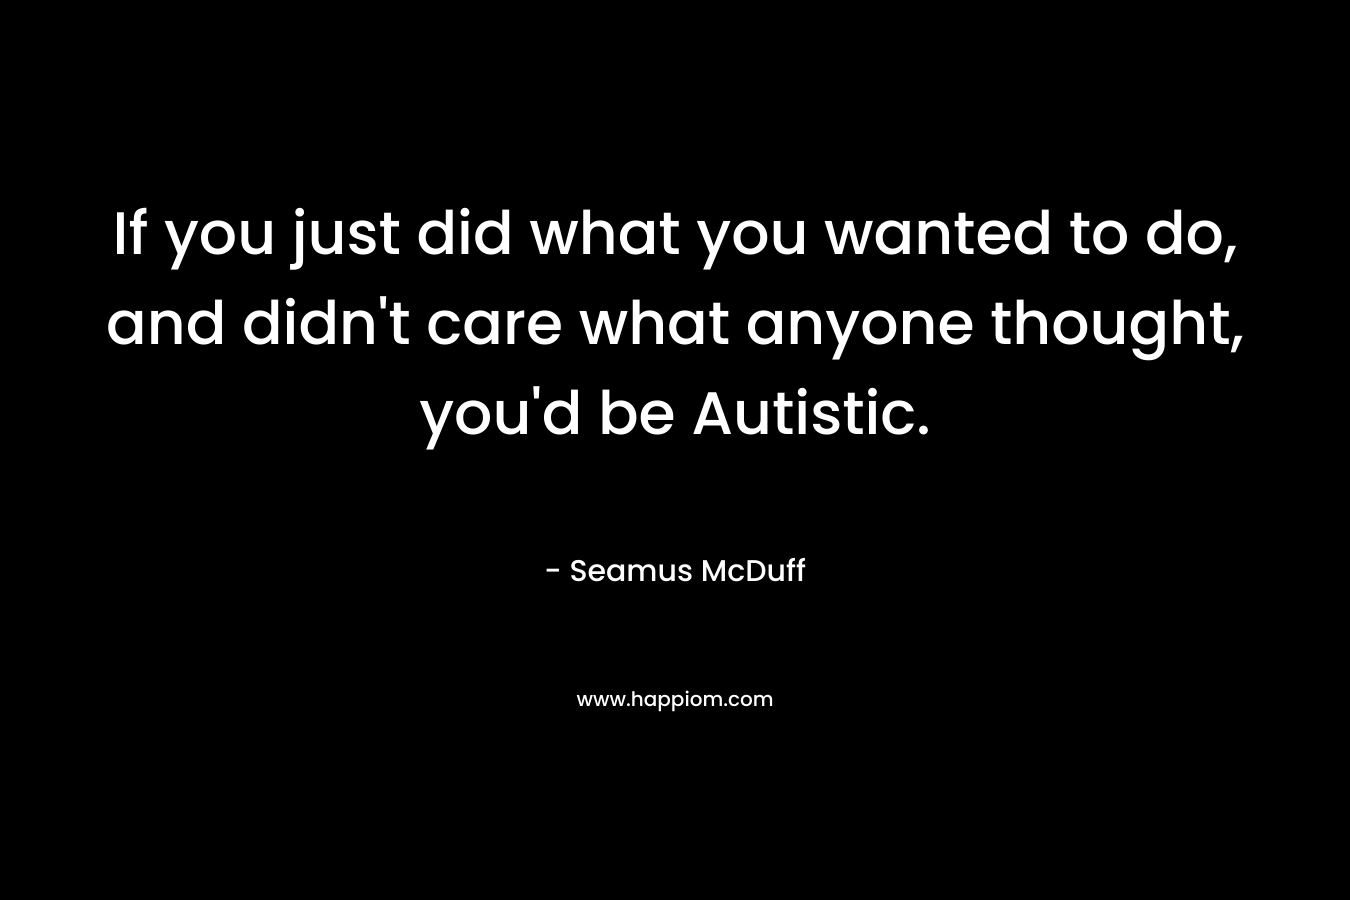 If you just did what you wanted to do, and didn't care what anyone thought, you'd be Autistic.